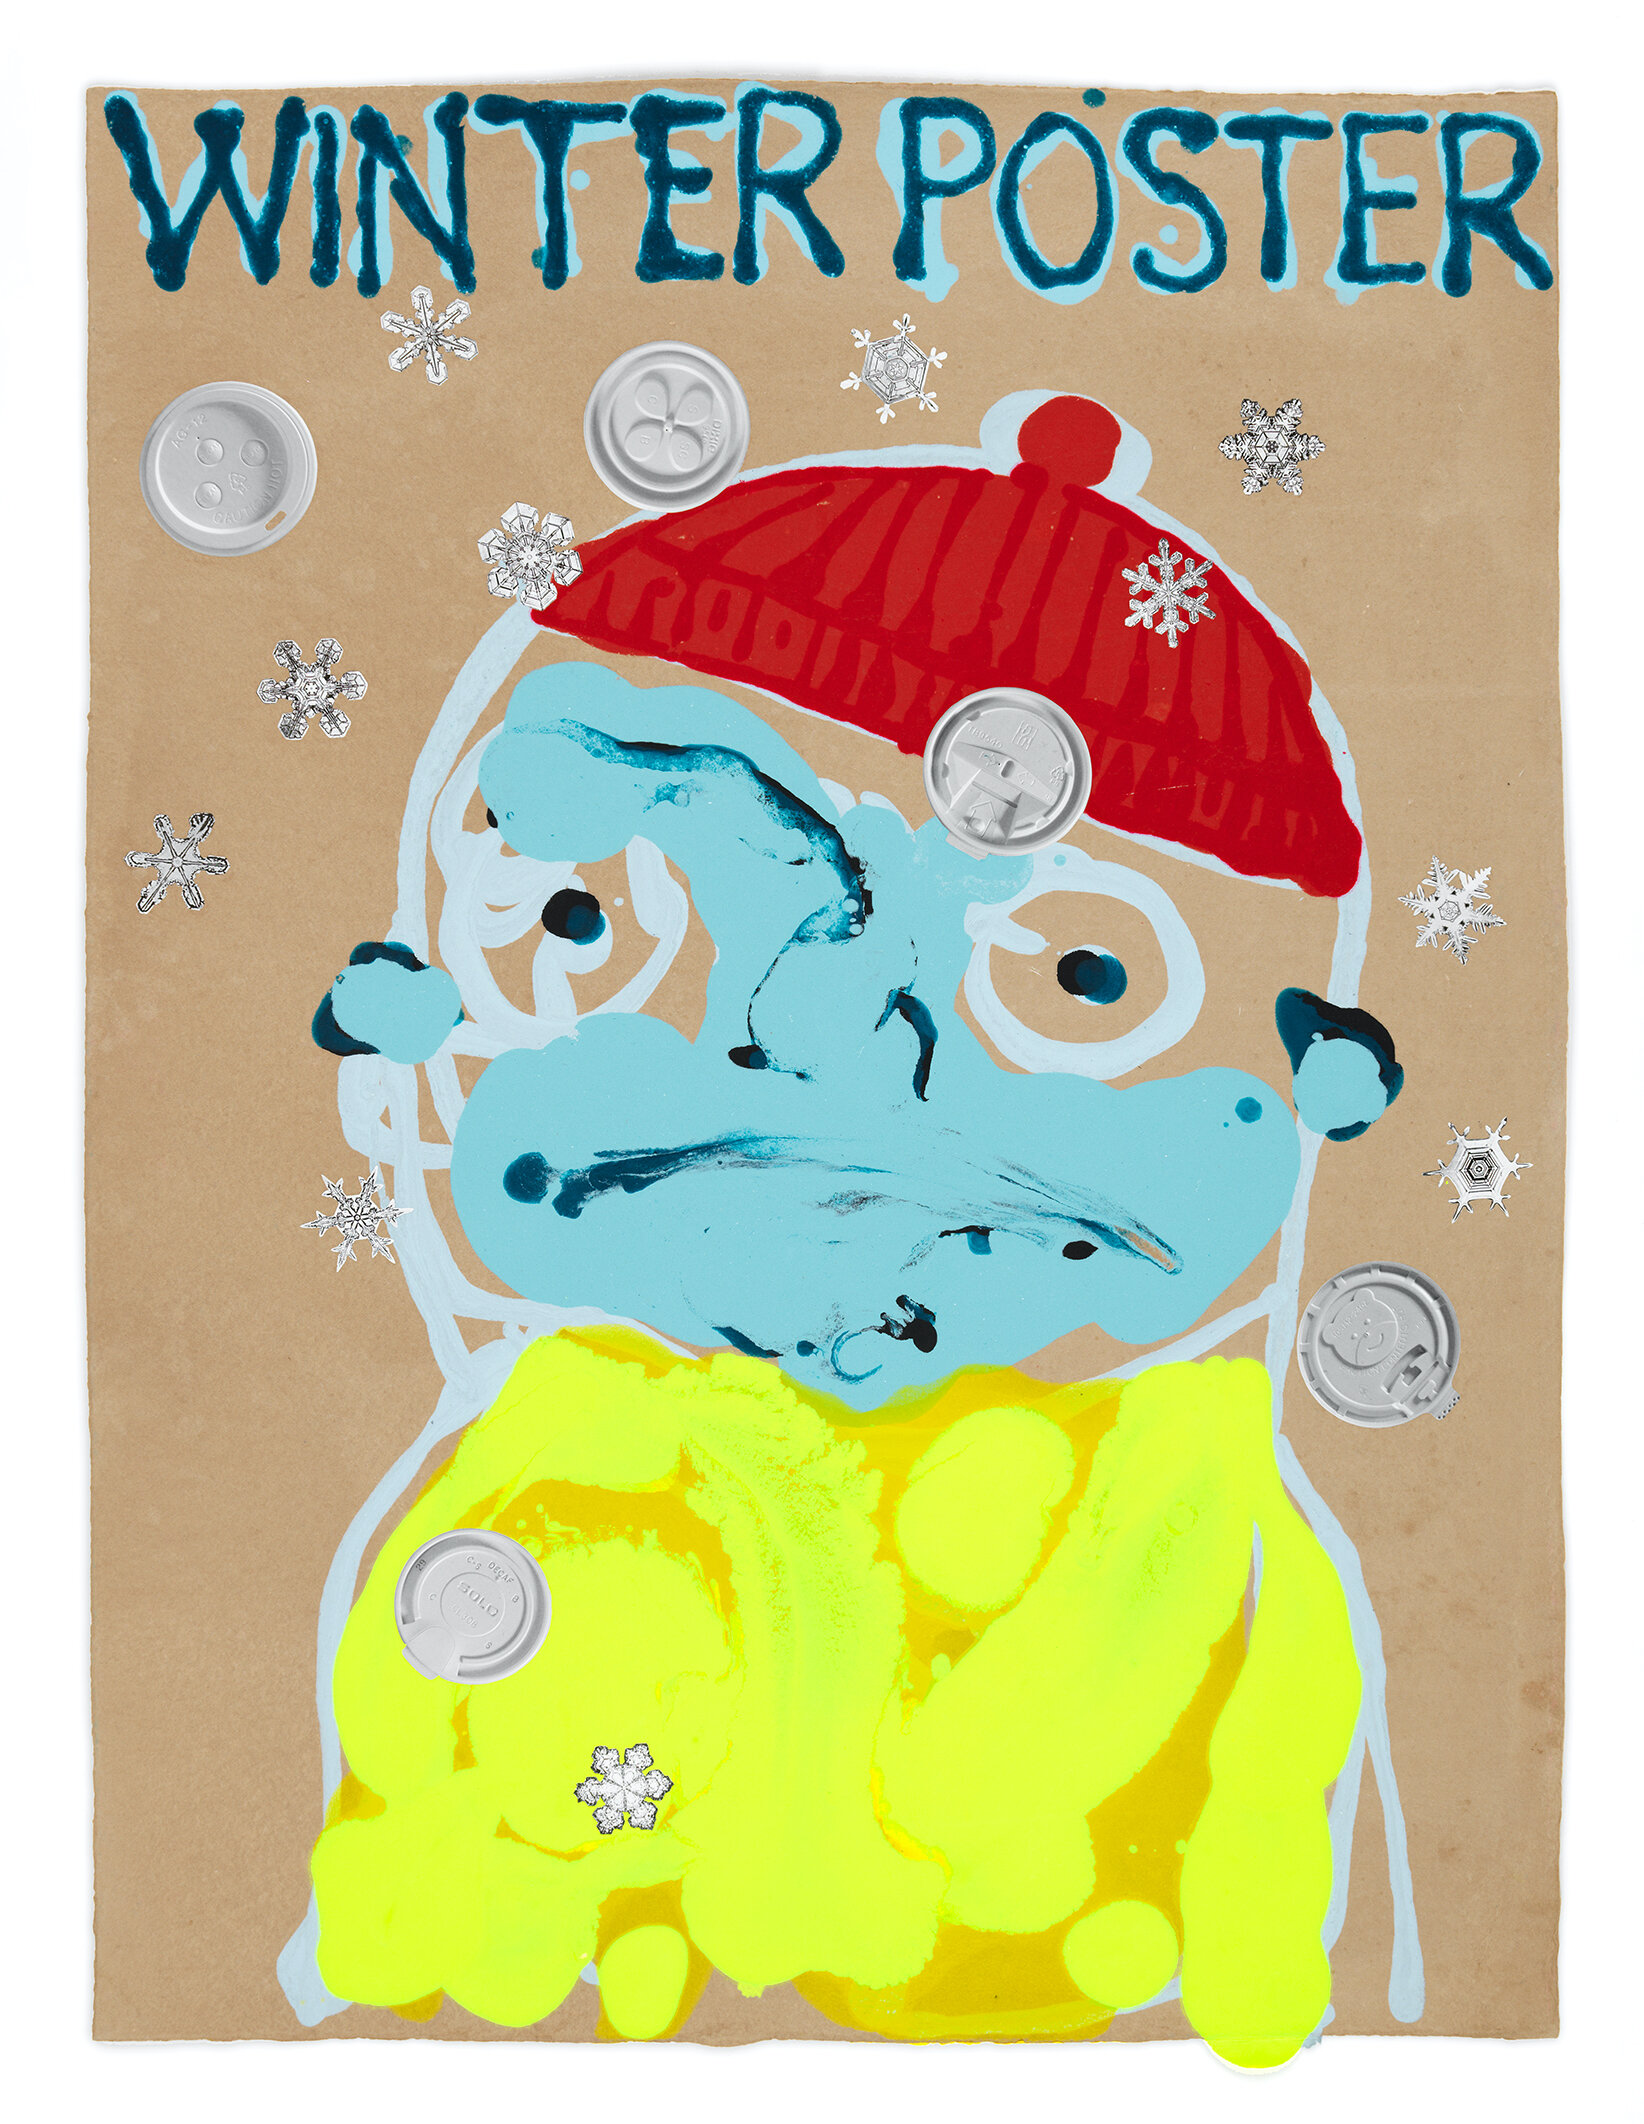  Nicole Eisenman,  Winter Poster , 2020, Paper, 40 x 30 inches.  